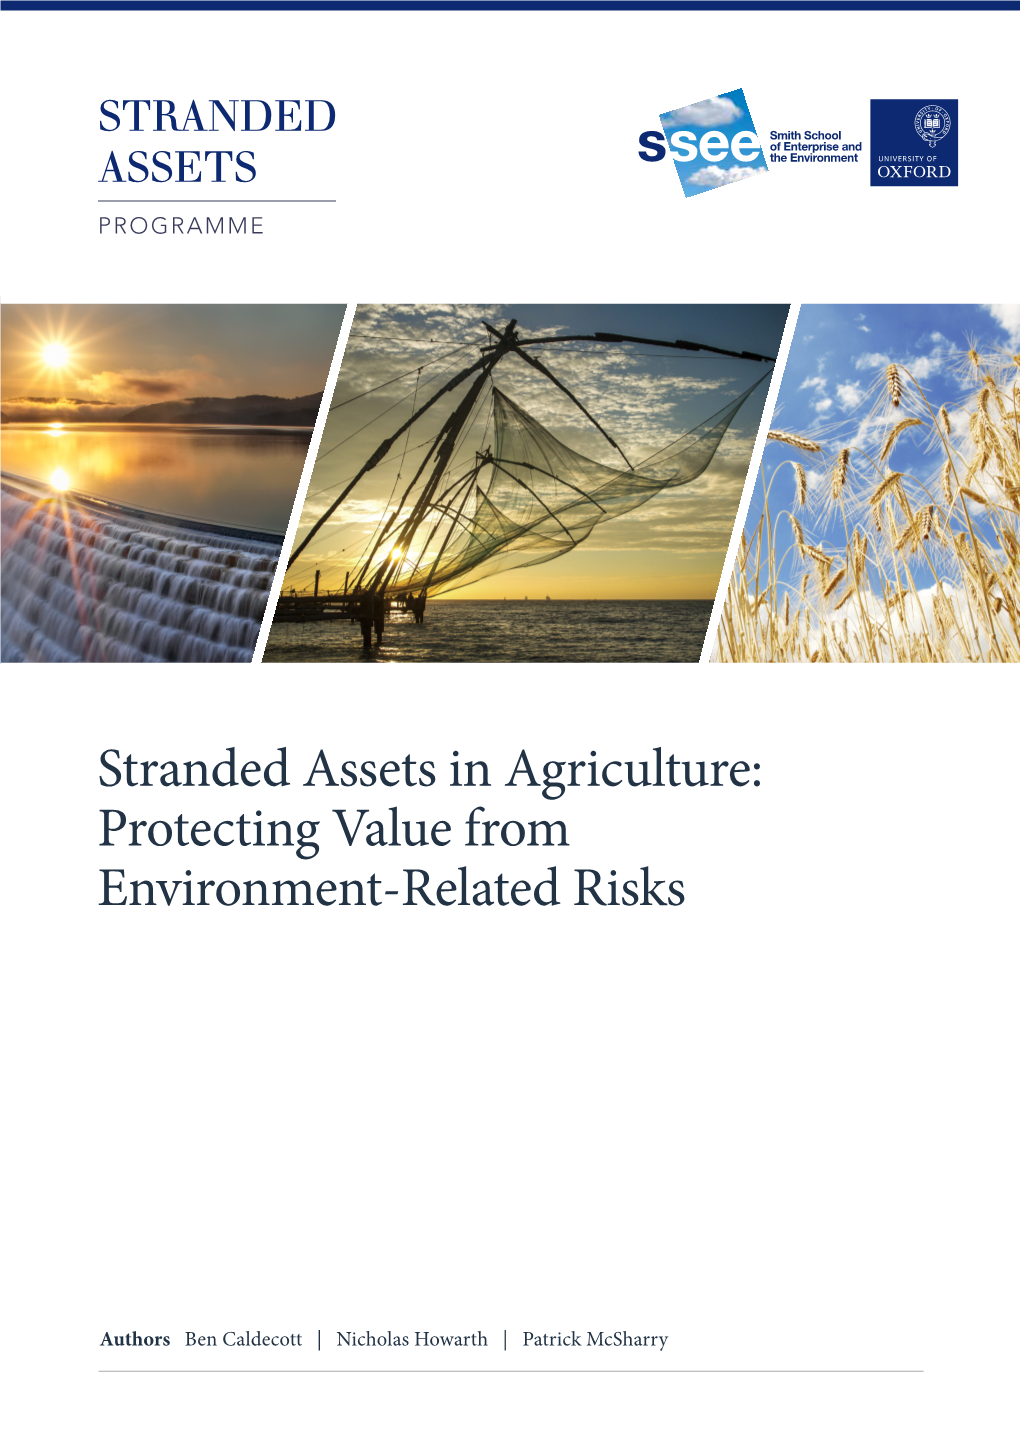 Stranded Assets in Agriculture: Protecting Value from Environment-Related Risks